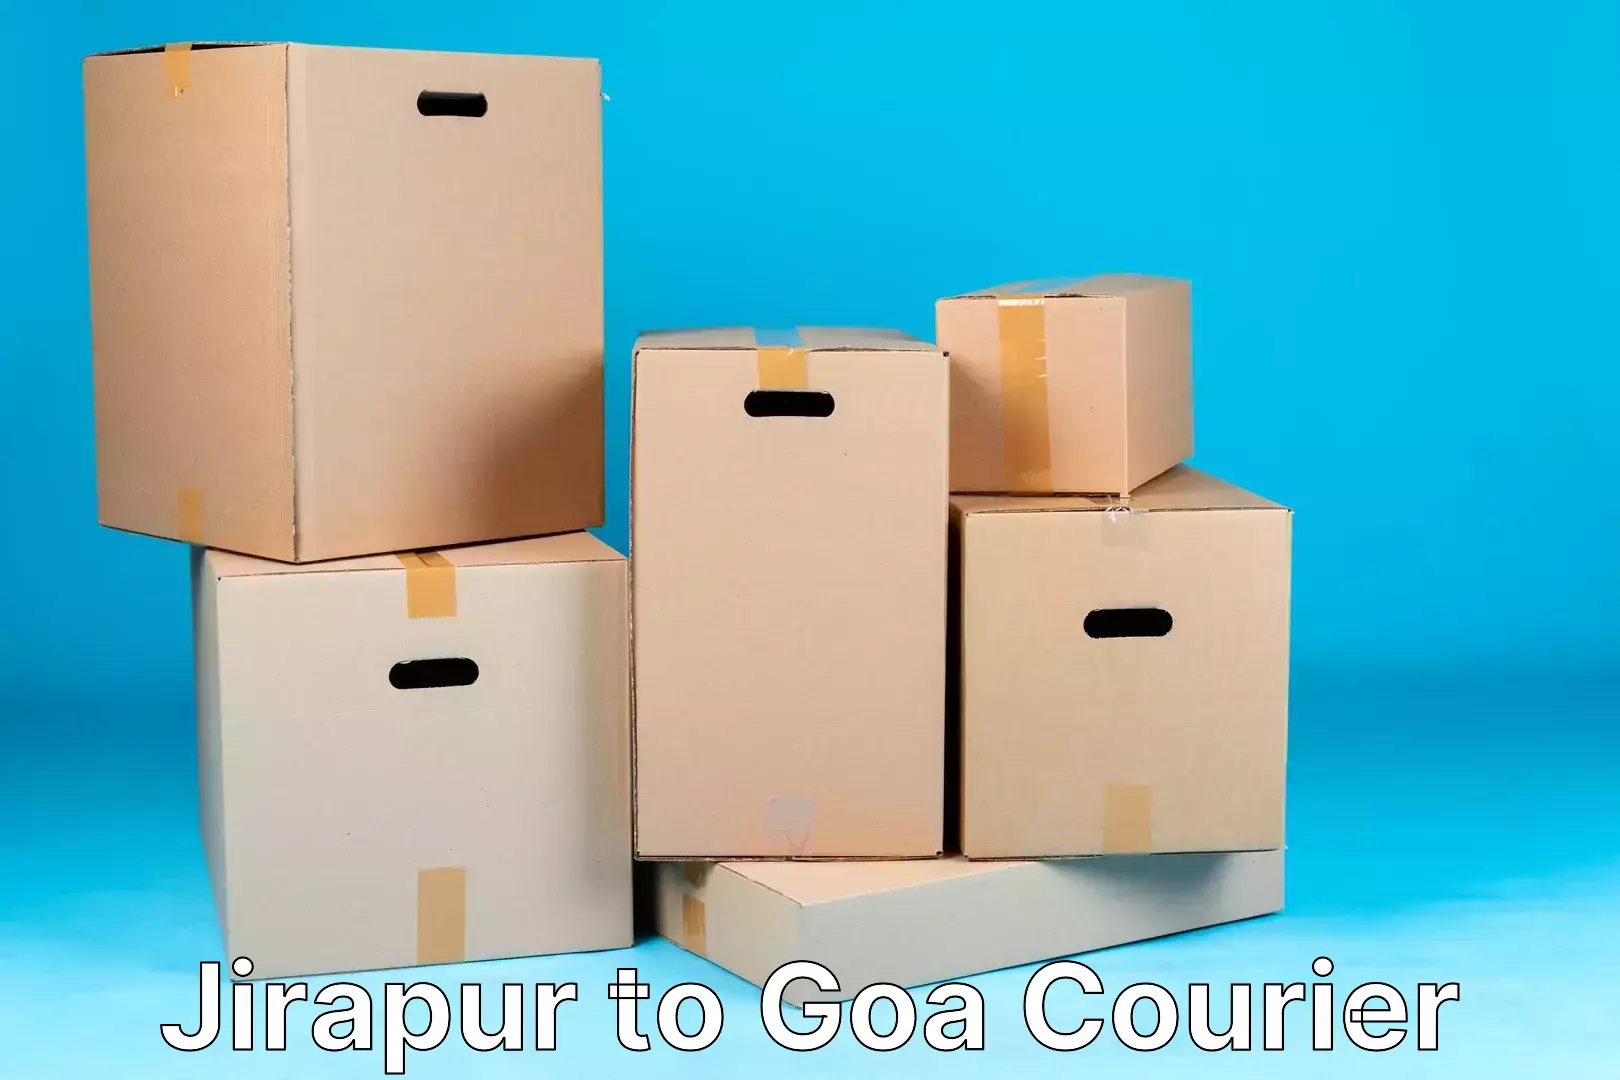 Expedited shipping methods Jirapur to Goa